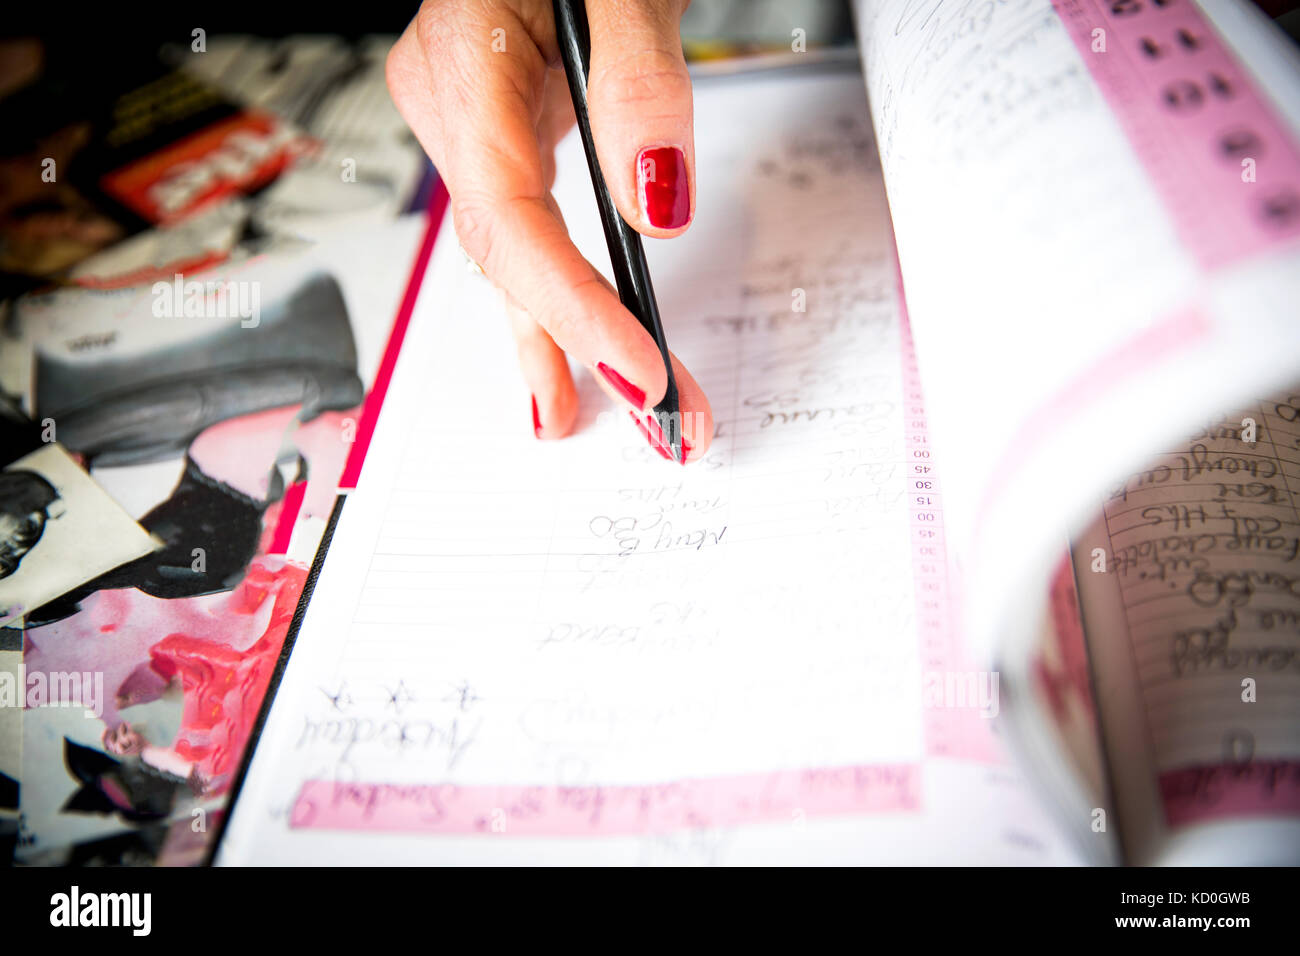 Woman writing in appointments book Stock Photo